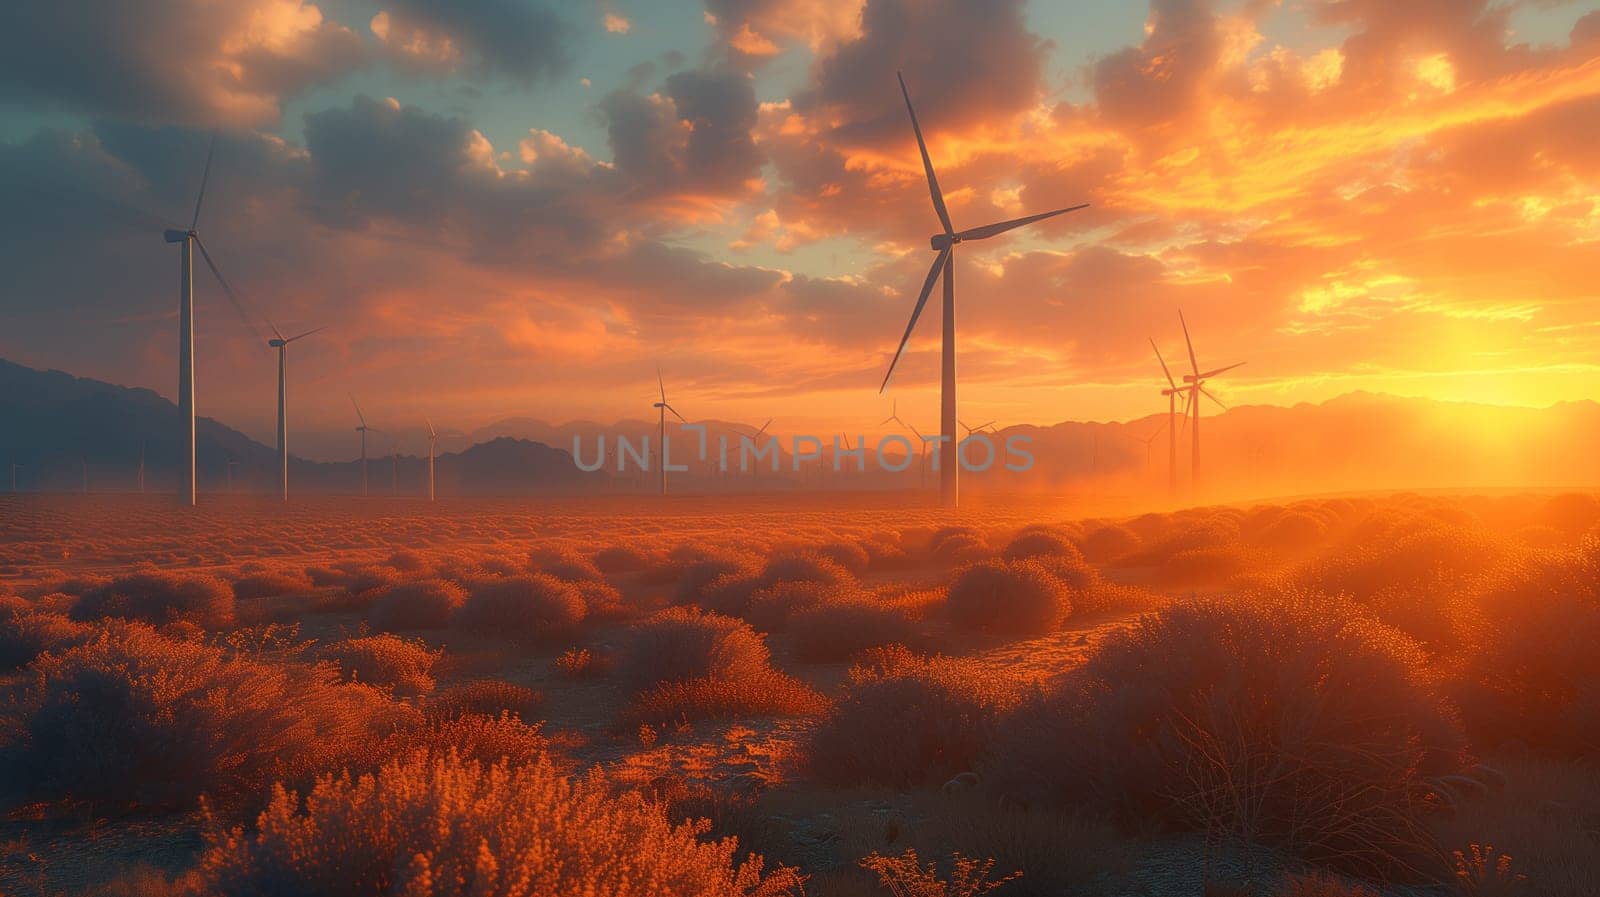 a sunset with wind turbines in the foreground and mountains in the background by richwolf